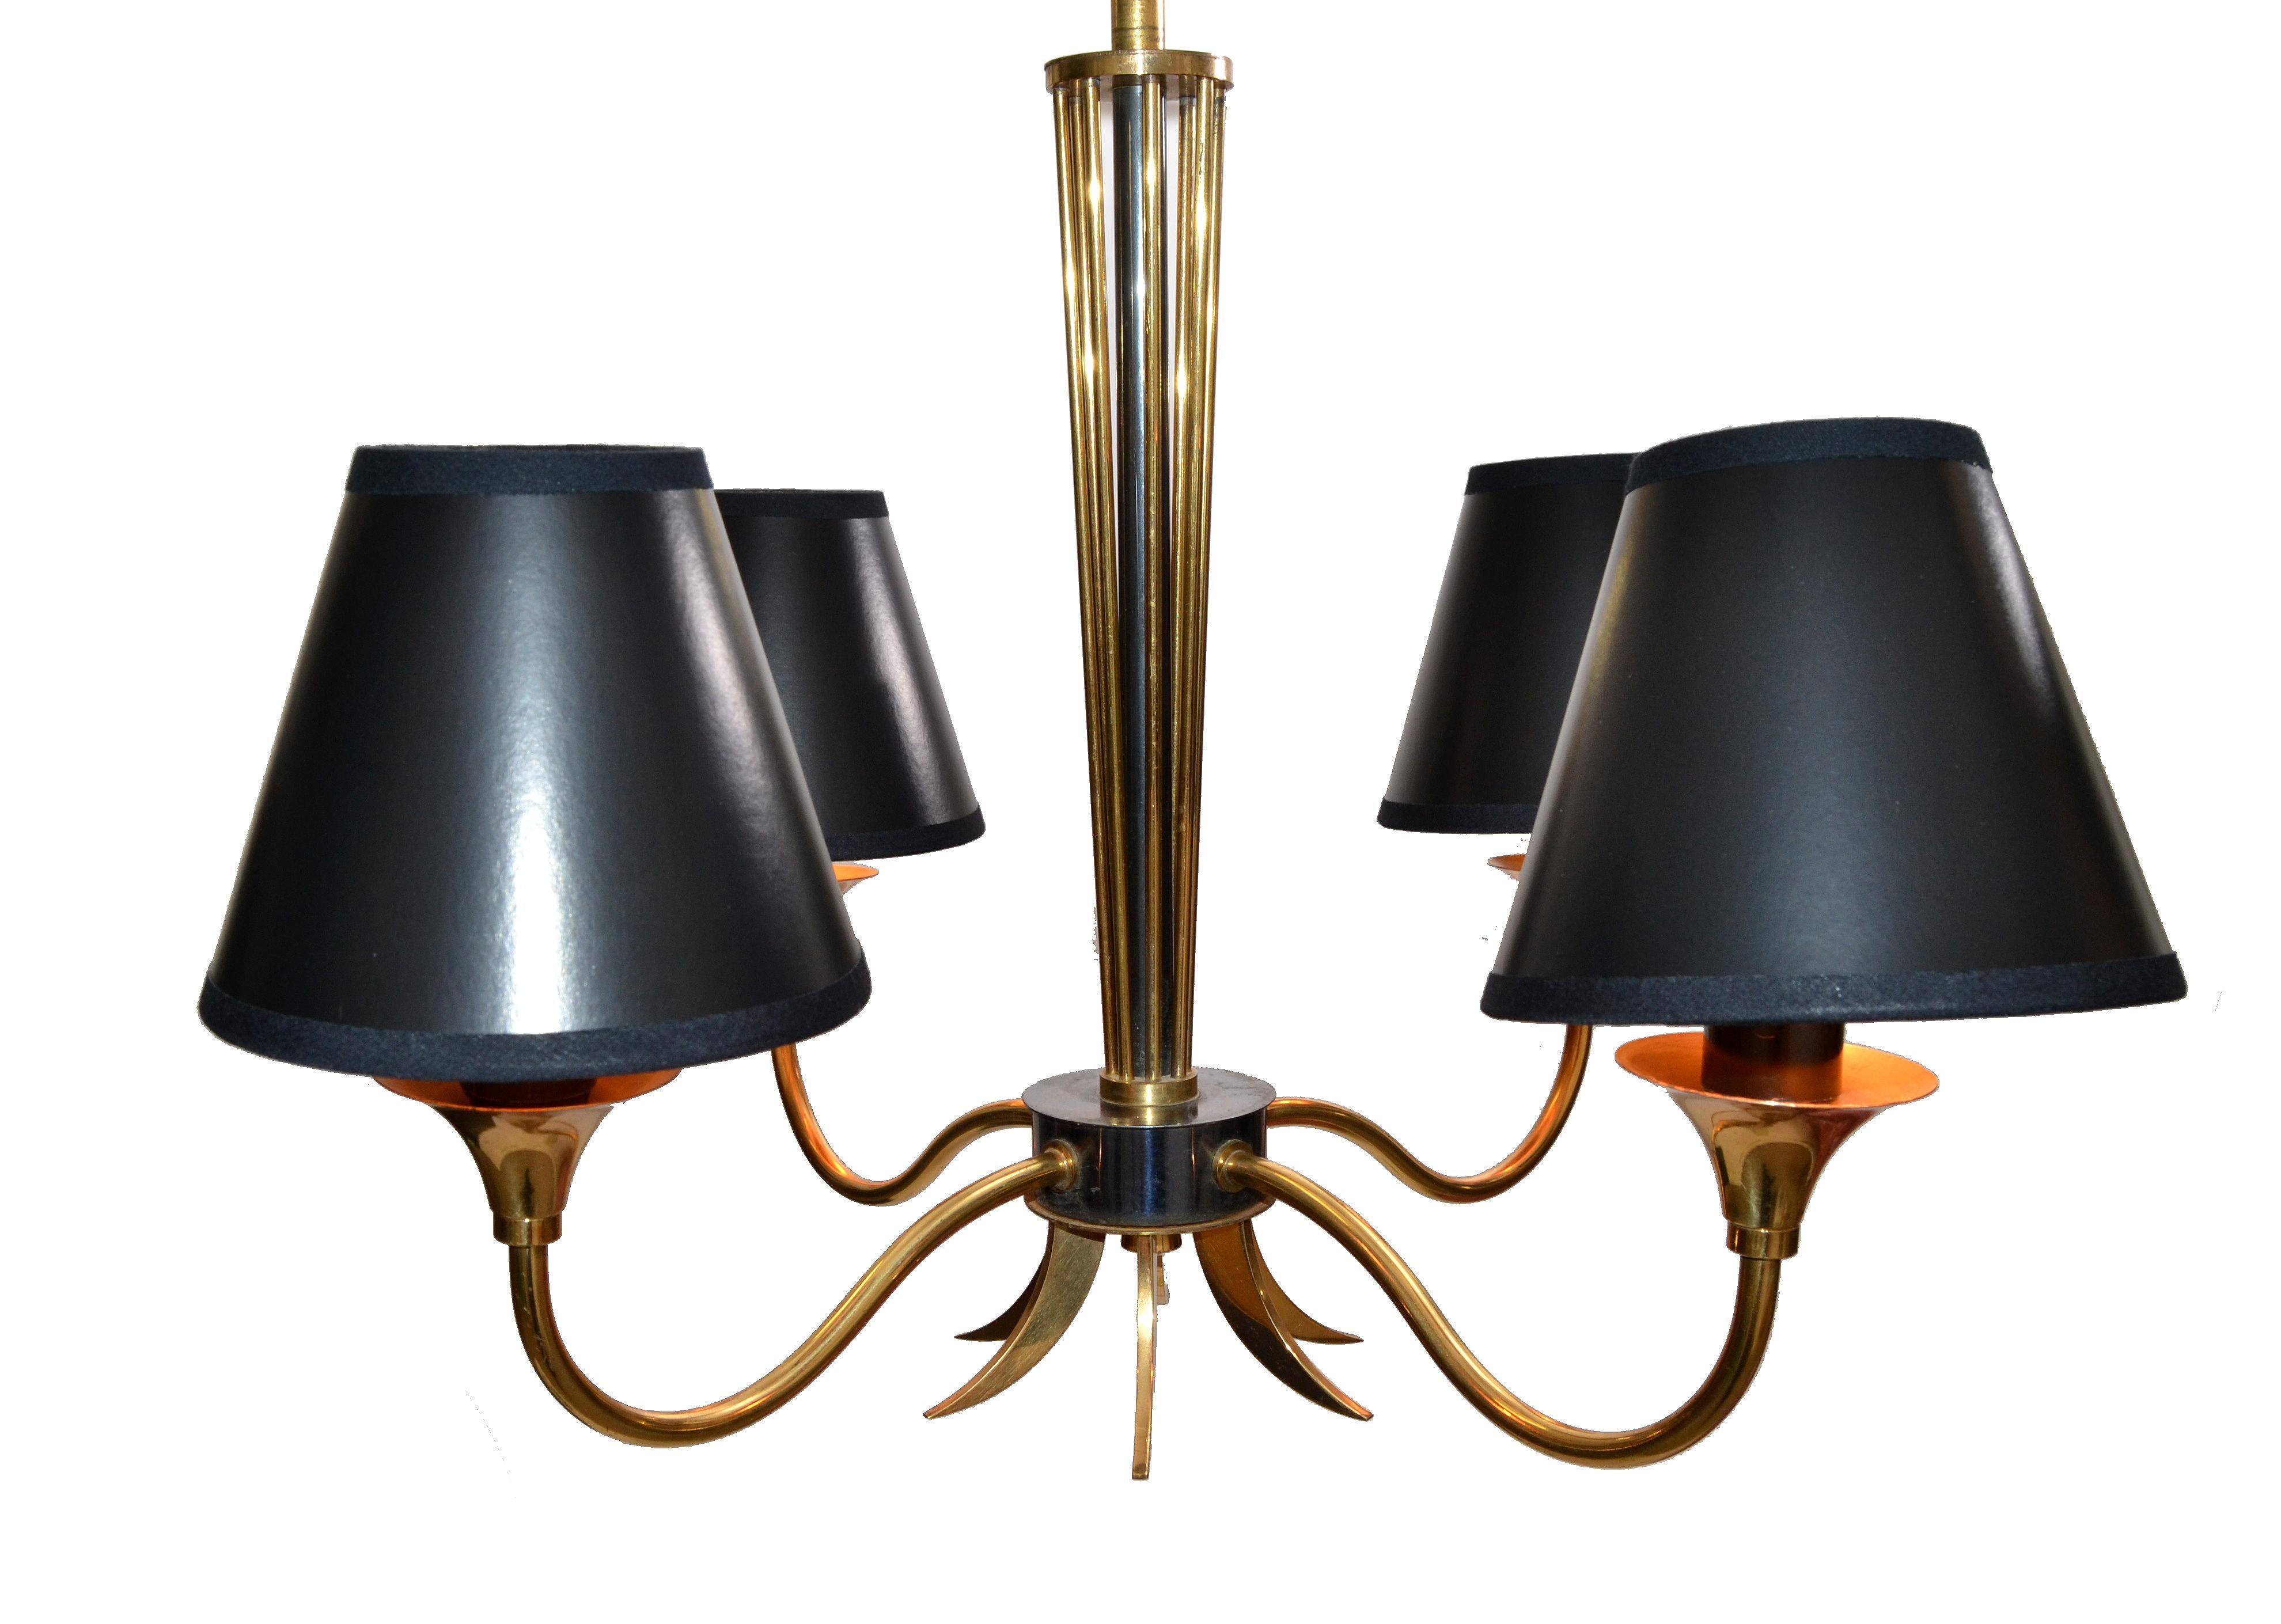 Maison Lunel Four-Light Chandelier Brass and Gun Metal French Mid-Century Modern In Good Condition For Sale In Miami, FL